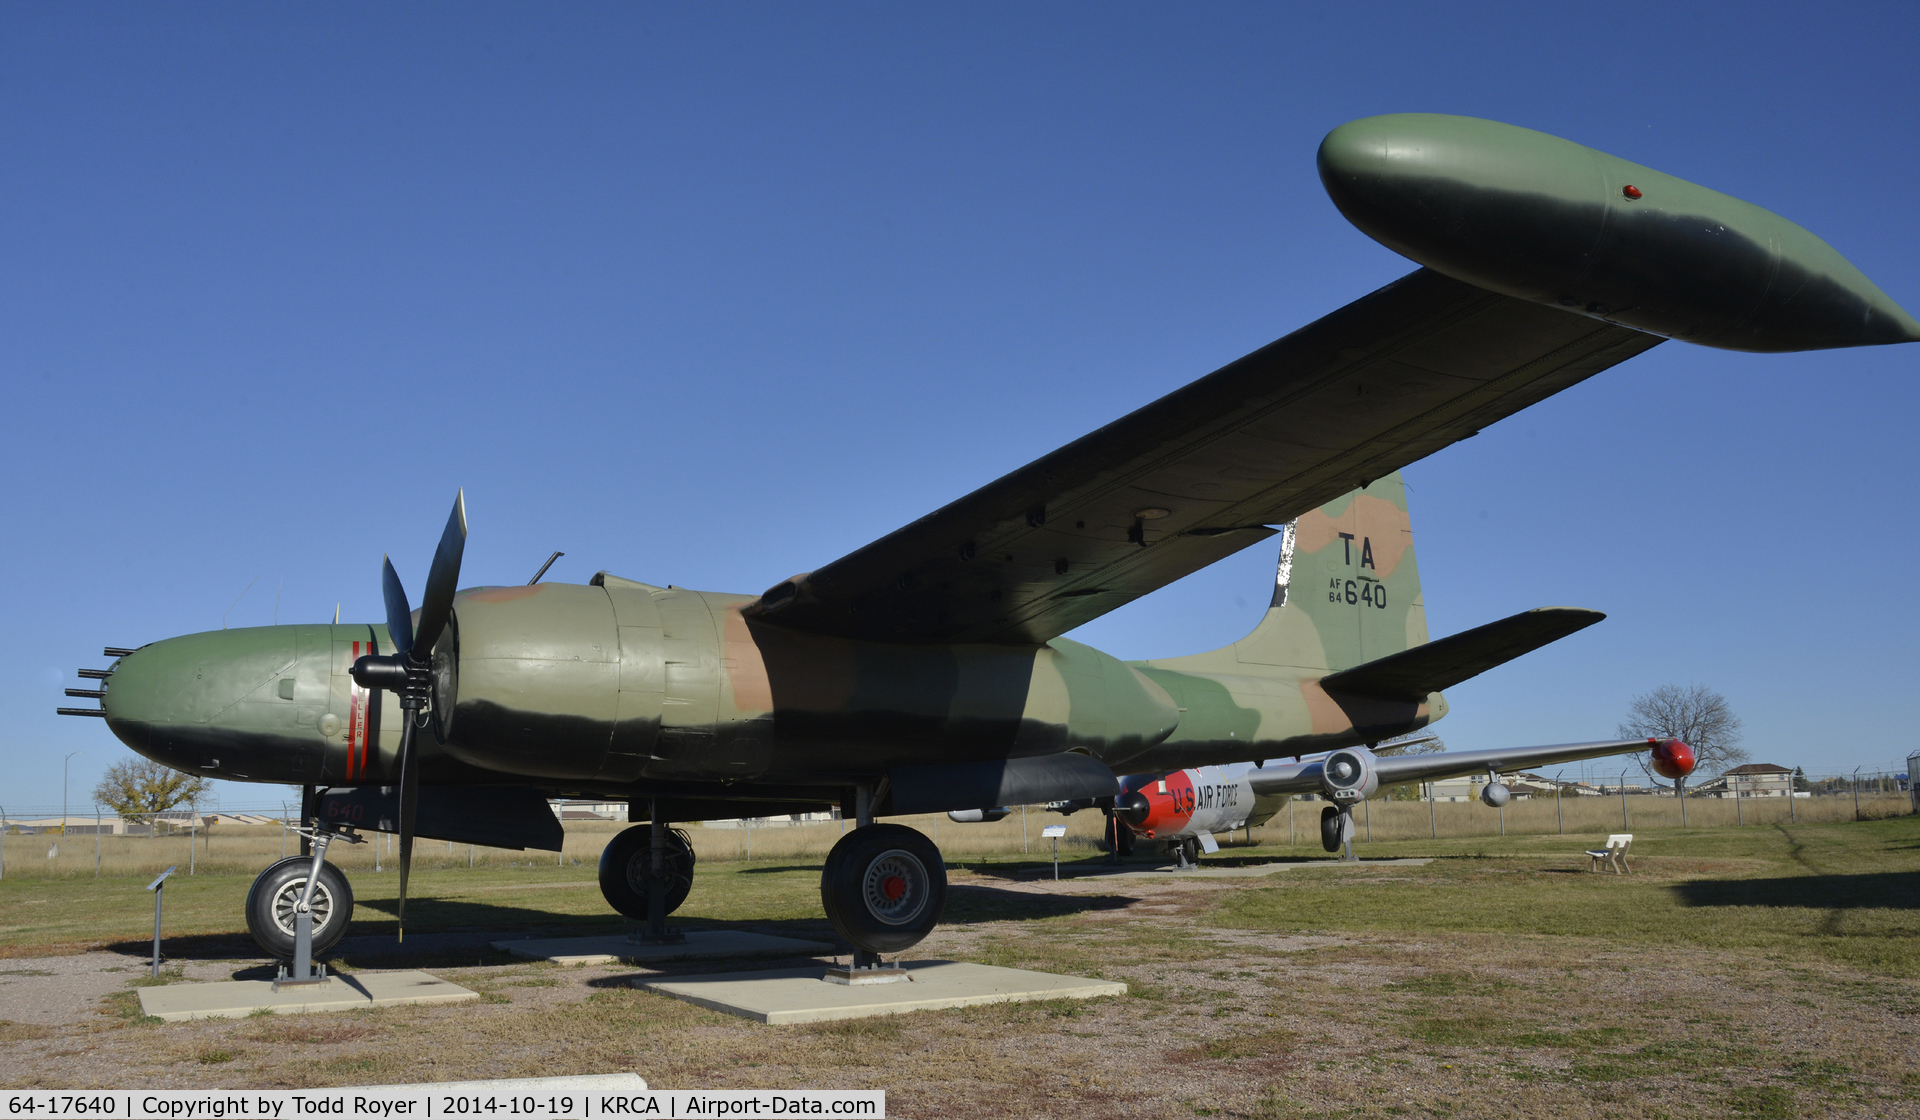 64-17640, 1964 Douglas-On Mark B-26K Counter Invader C/N 29175 (was 44-35896), At the South Dakota Air and Space Museum